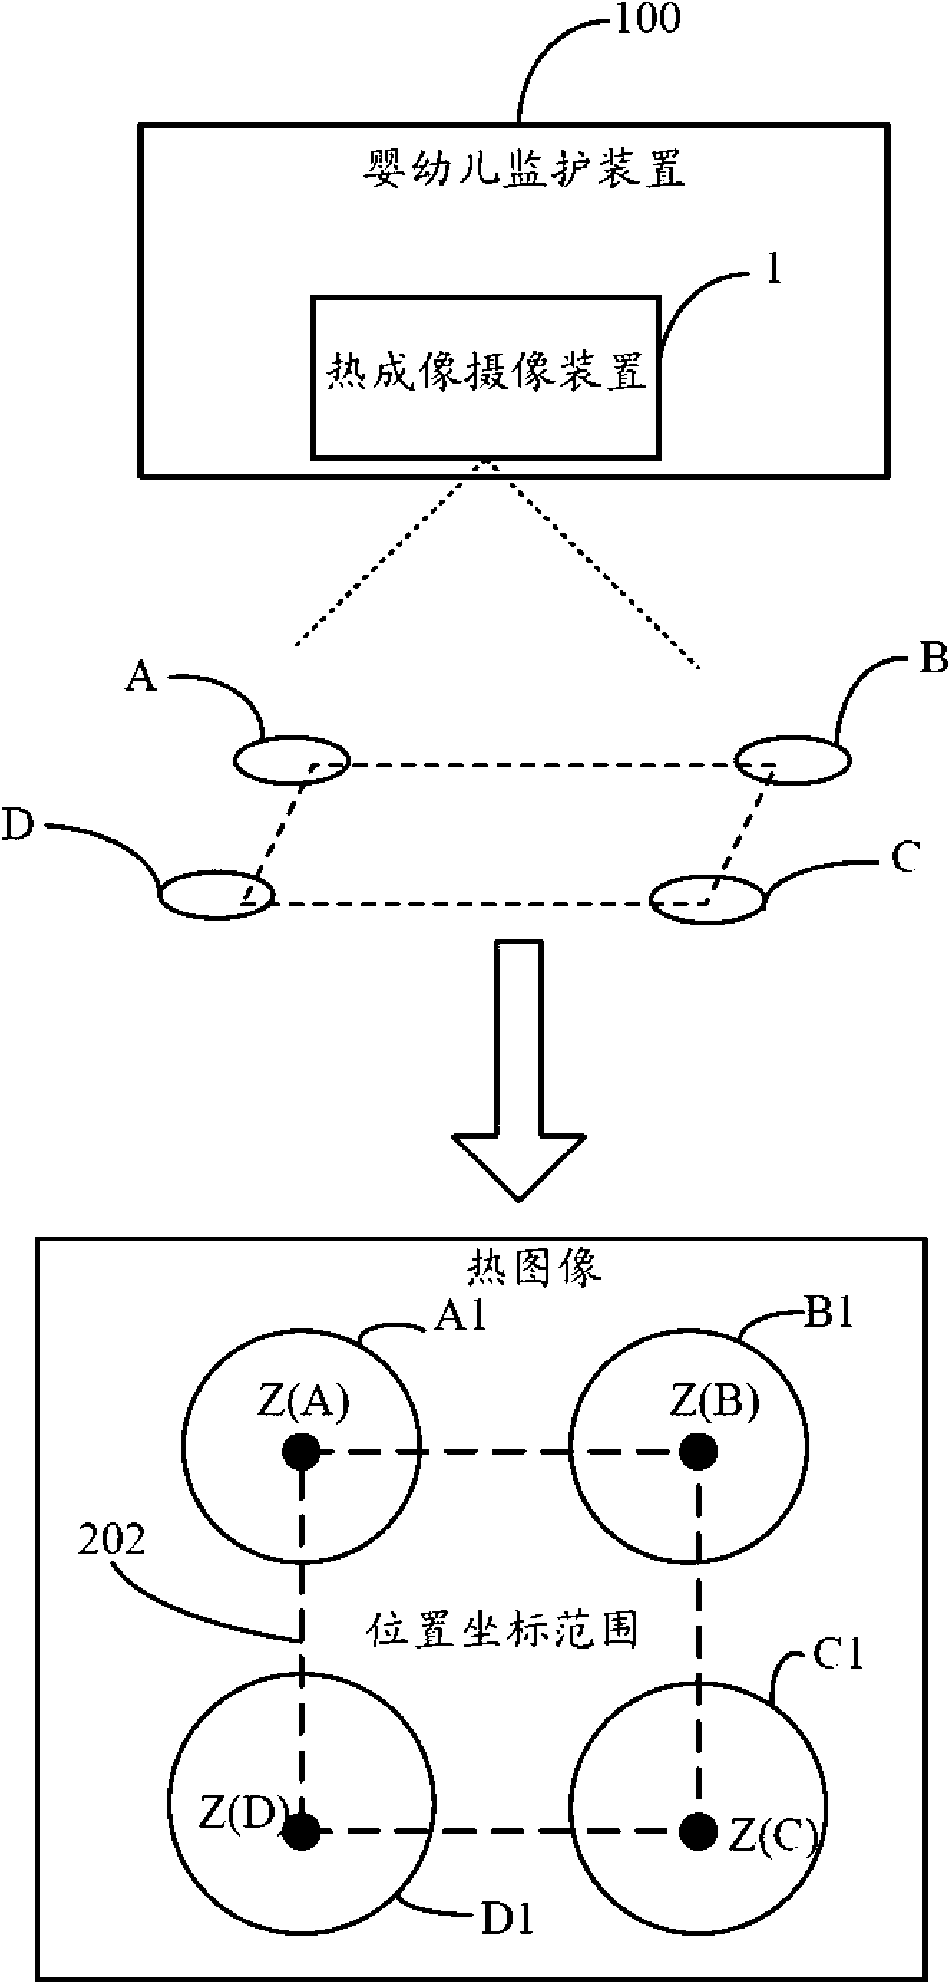 Infant monitoring device and method